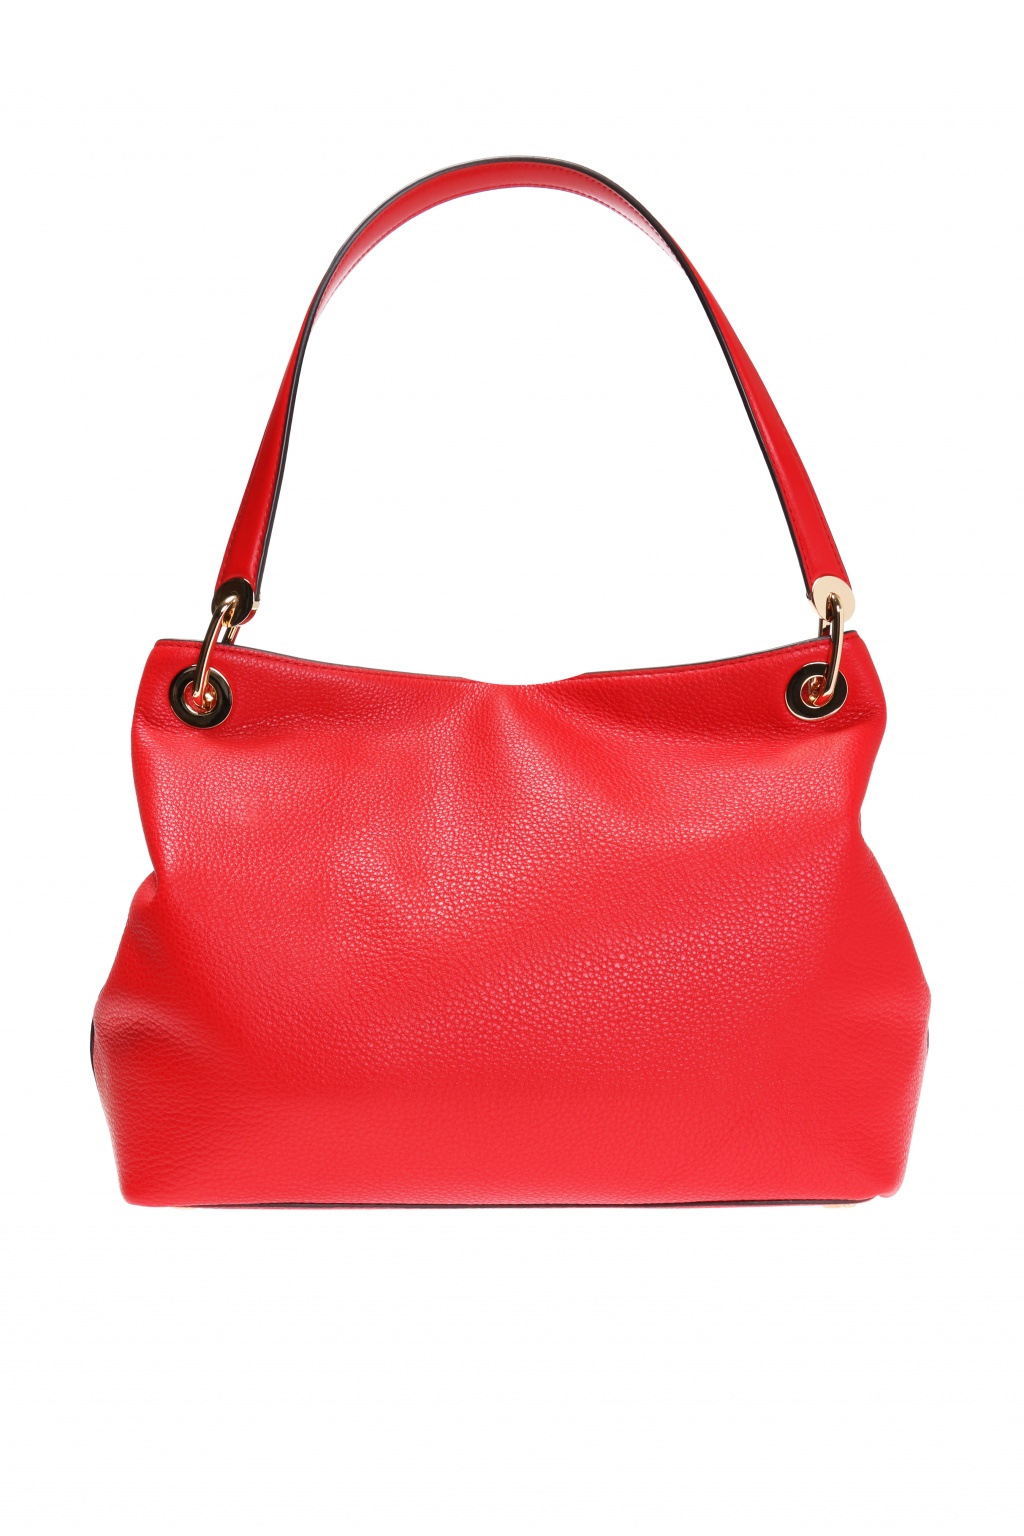 MICHAEL Michael Kors, Bags, Hpmichael Michael Kors Red Pebbled Leather Crossbody  Bag